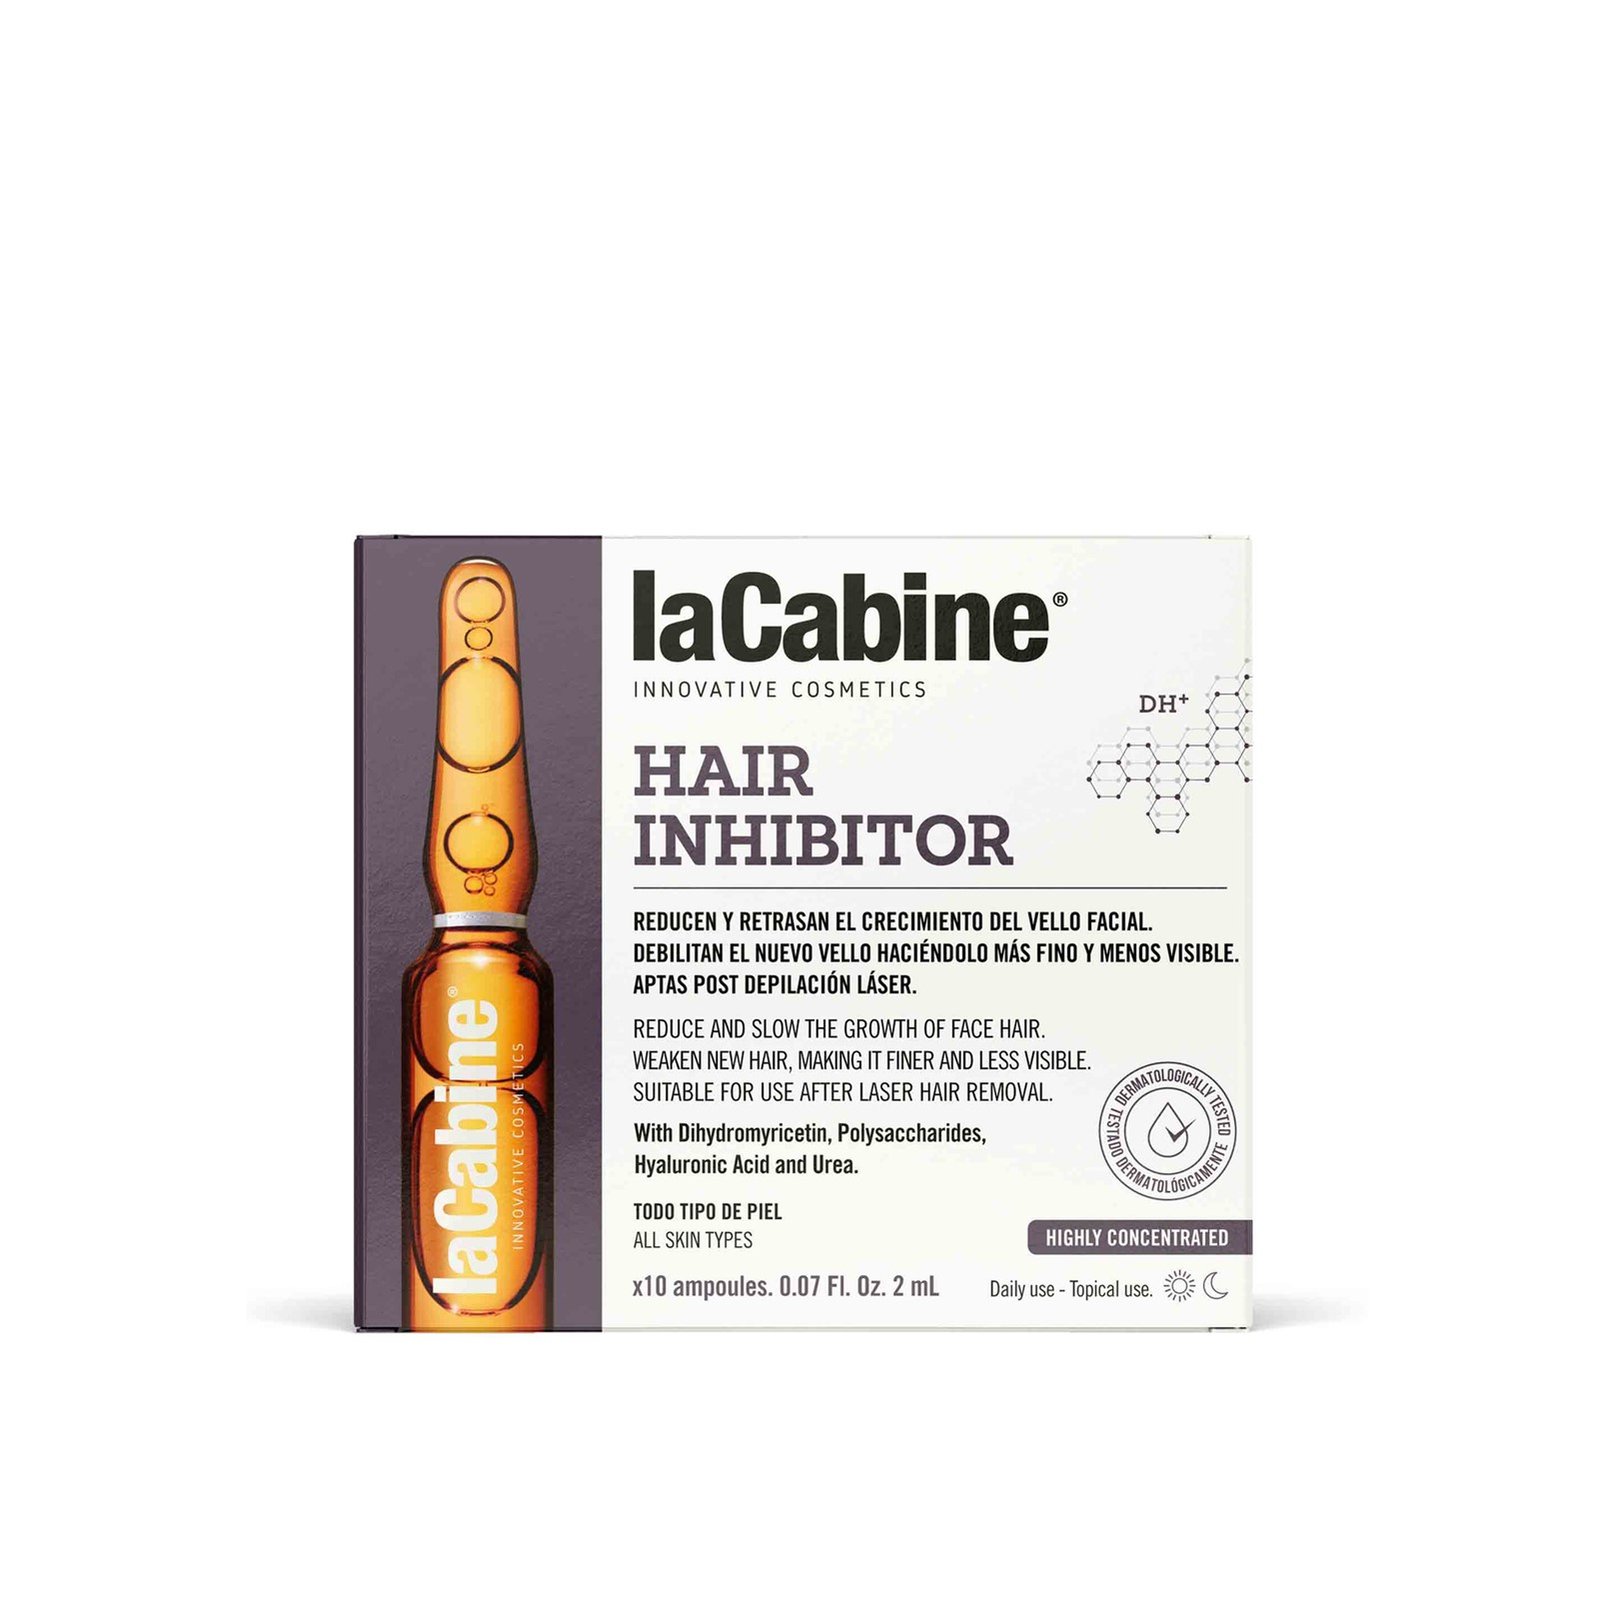 La Cabine Hair Inhibitor Concentrated Ampoules 10x2ml